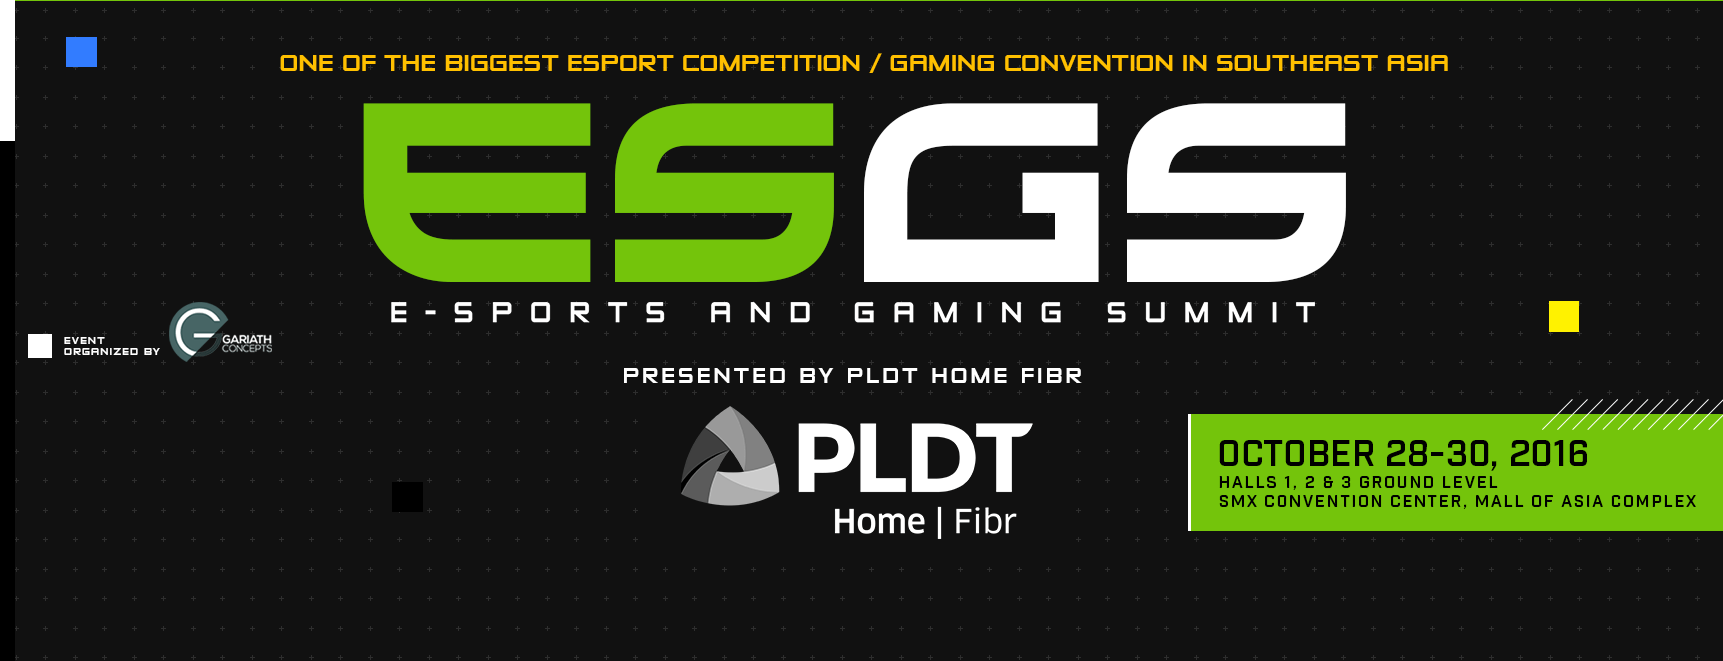 The Hype Continues with E-Sports and Gaming Summit 2016 18